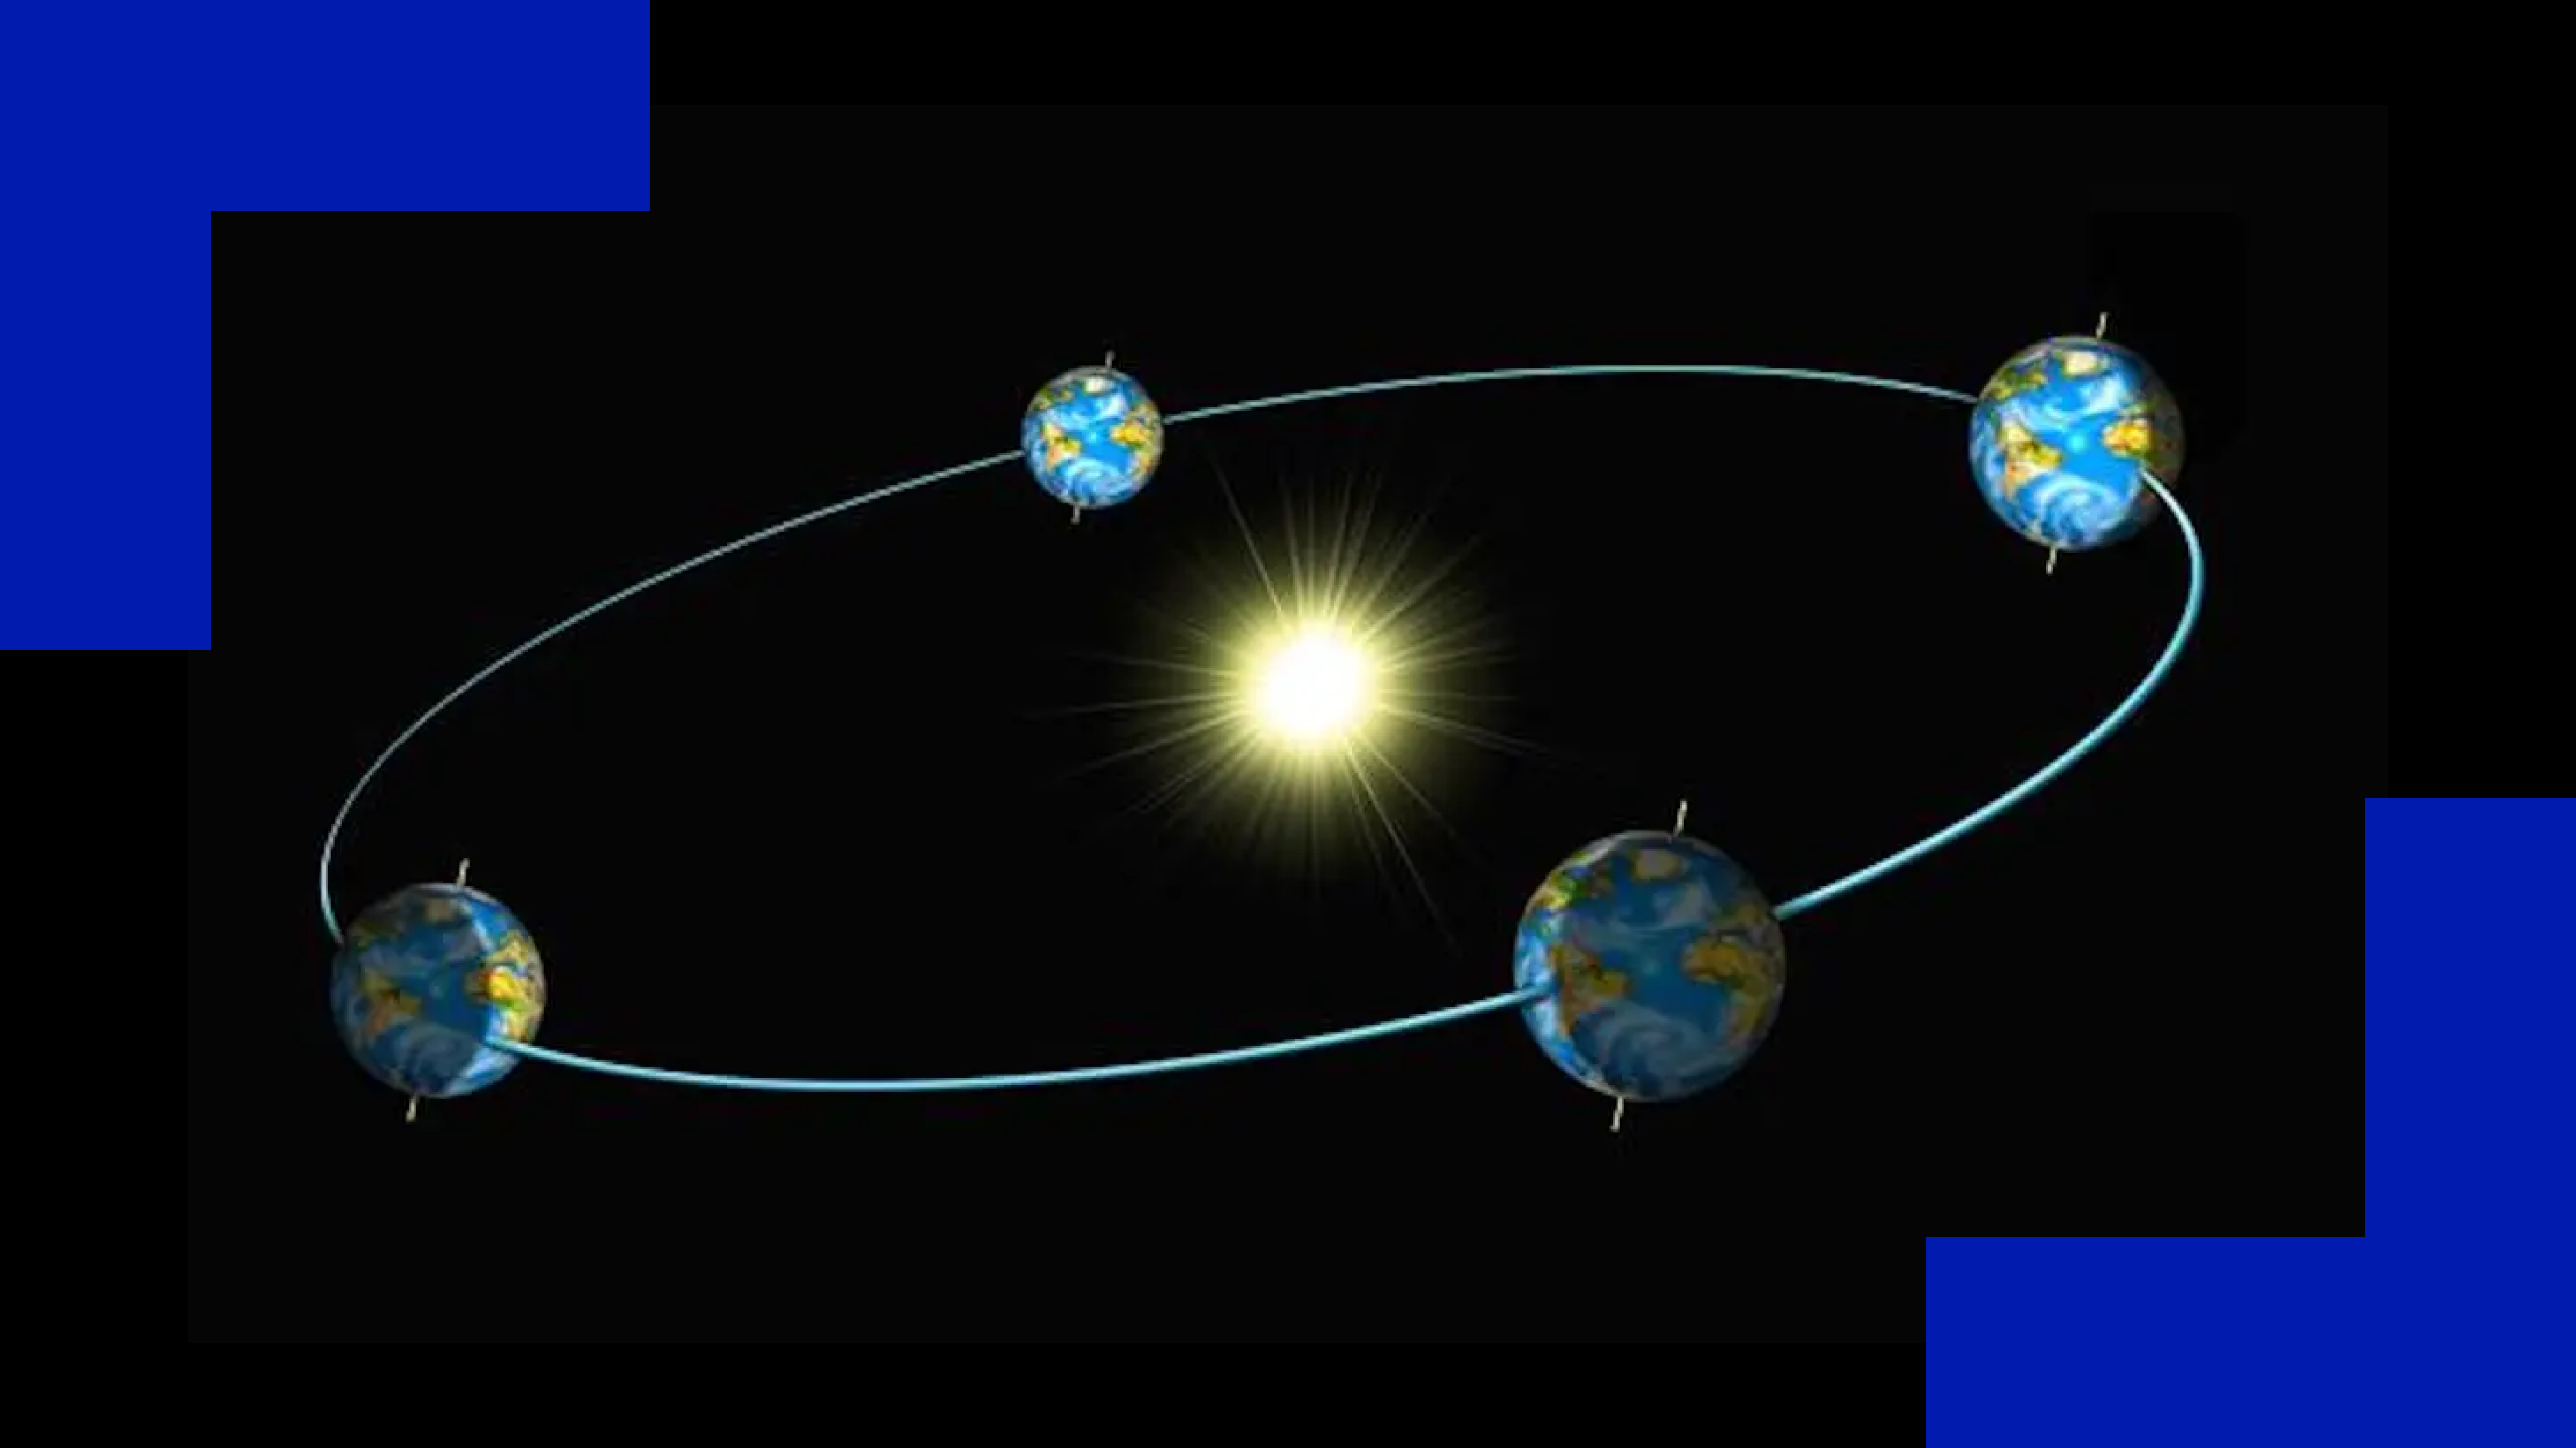 A diagram illustrating the earth's orbit around the sun with positions indicating seasonal change, including facts about leap day.